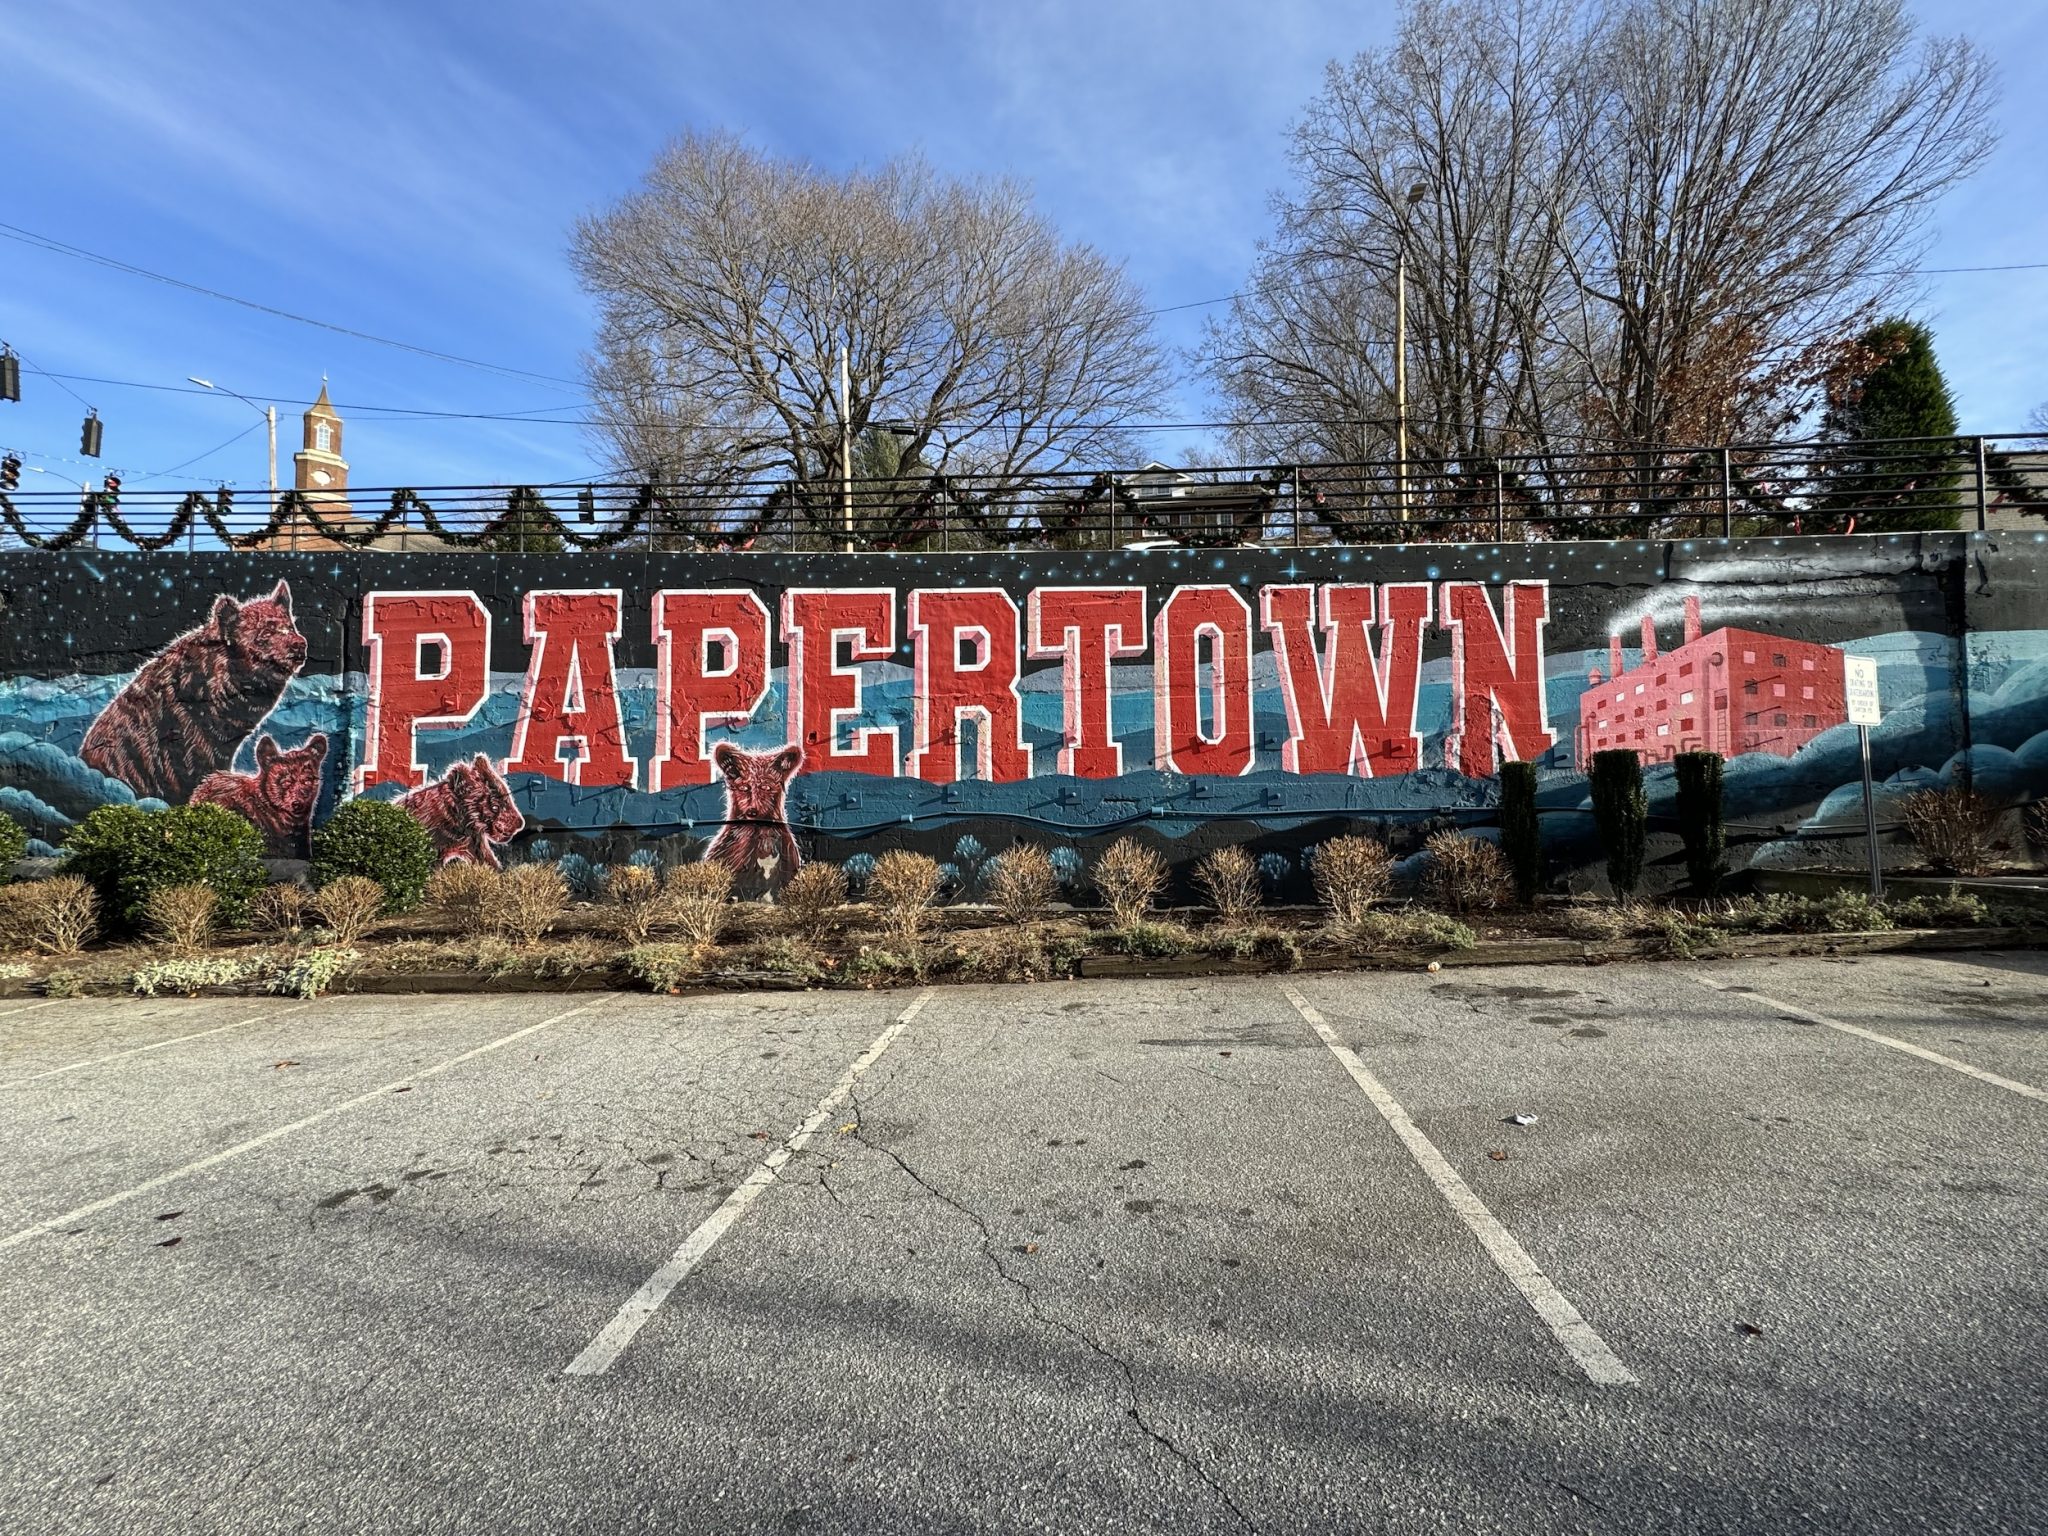 A mural painted on a wall in a parking lot reads "Papertown". The letters are in big varsity, all-caps red letters with a white outline. There are two black bears to the left of the letter "P." Some small, short landscaping is in the front of the mural. The foreground is mostly parking lot with white stripes. The background is trees without leaves and blue sky.